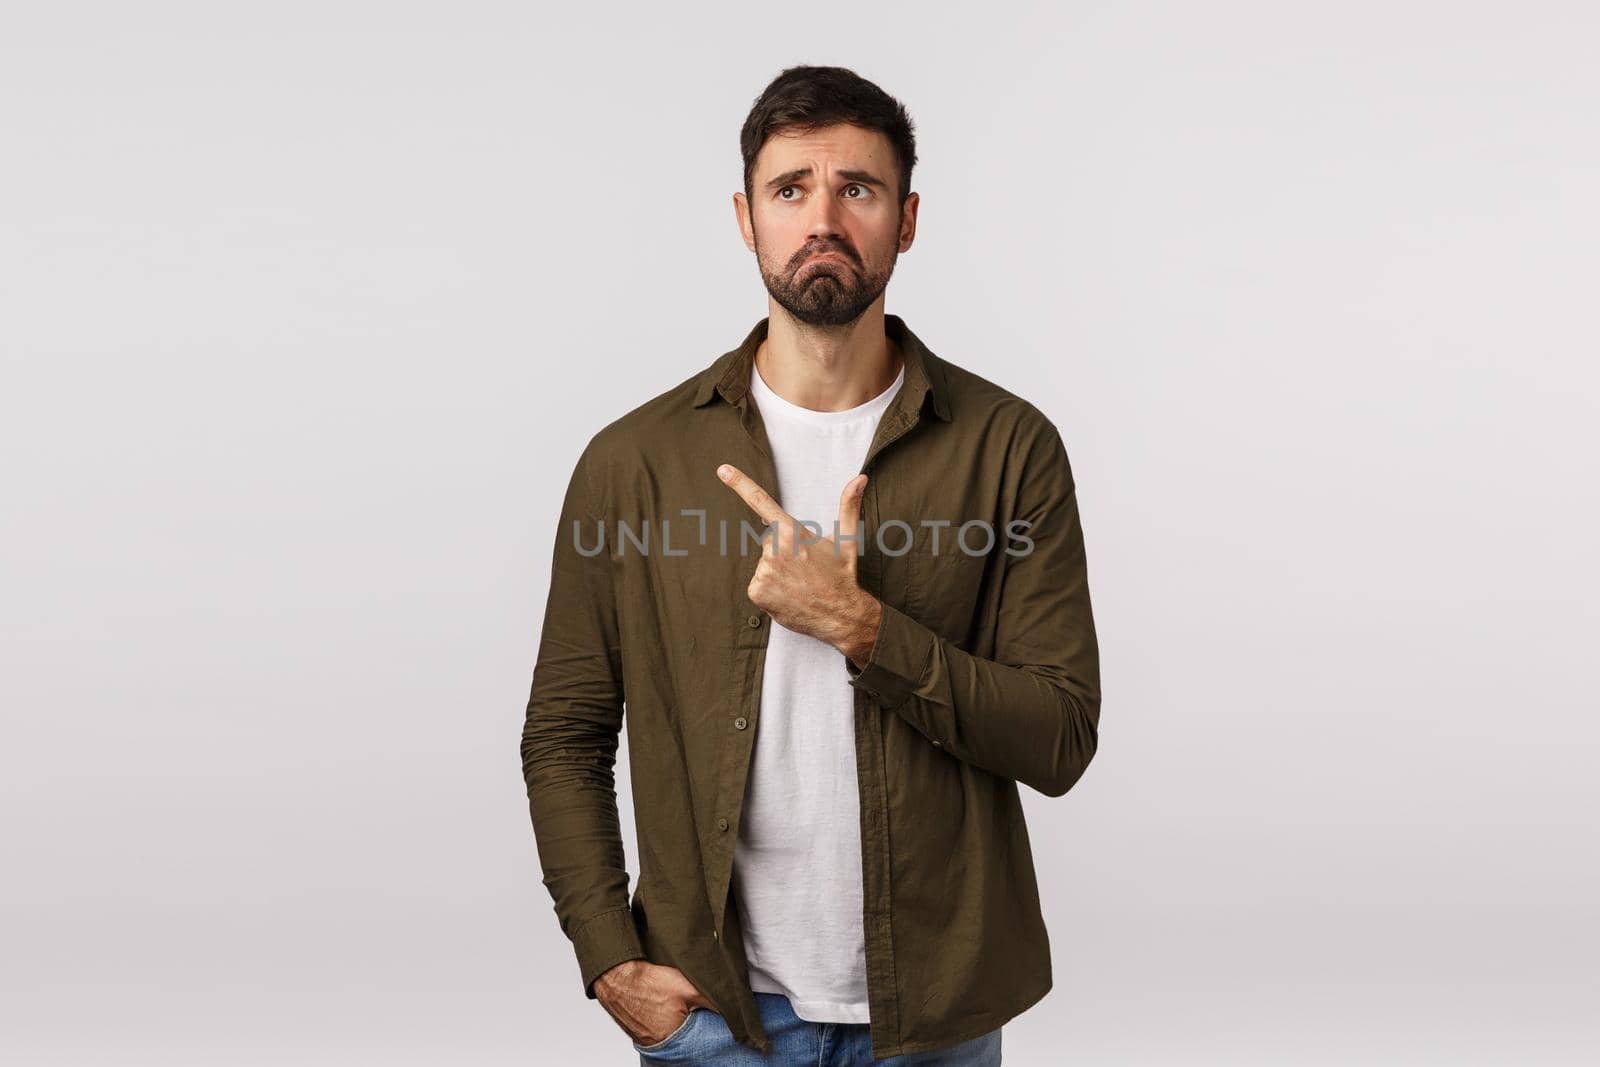 Man regret missed good opportunity feeling sad and miserable. Upset young bearded guy pulling gloomy face, frowning and look depressed, pointing upper left corner, standing white background.